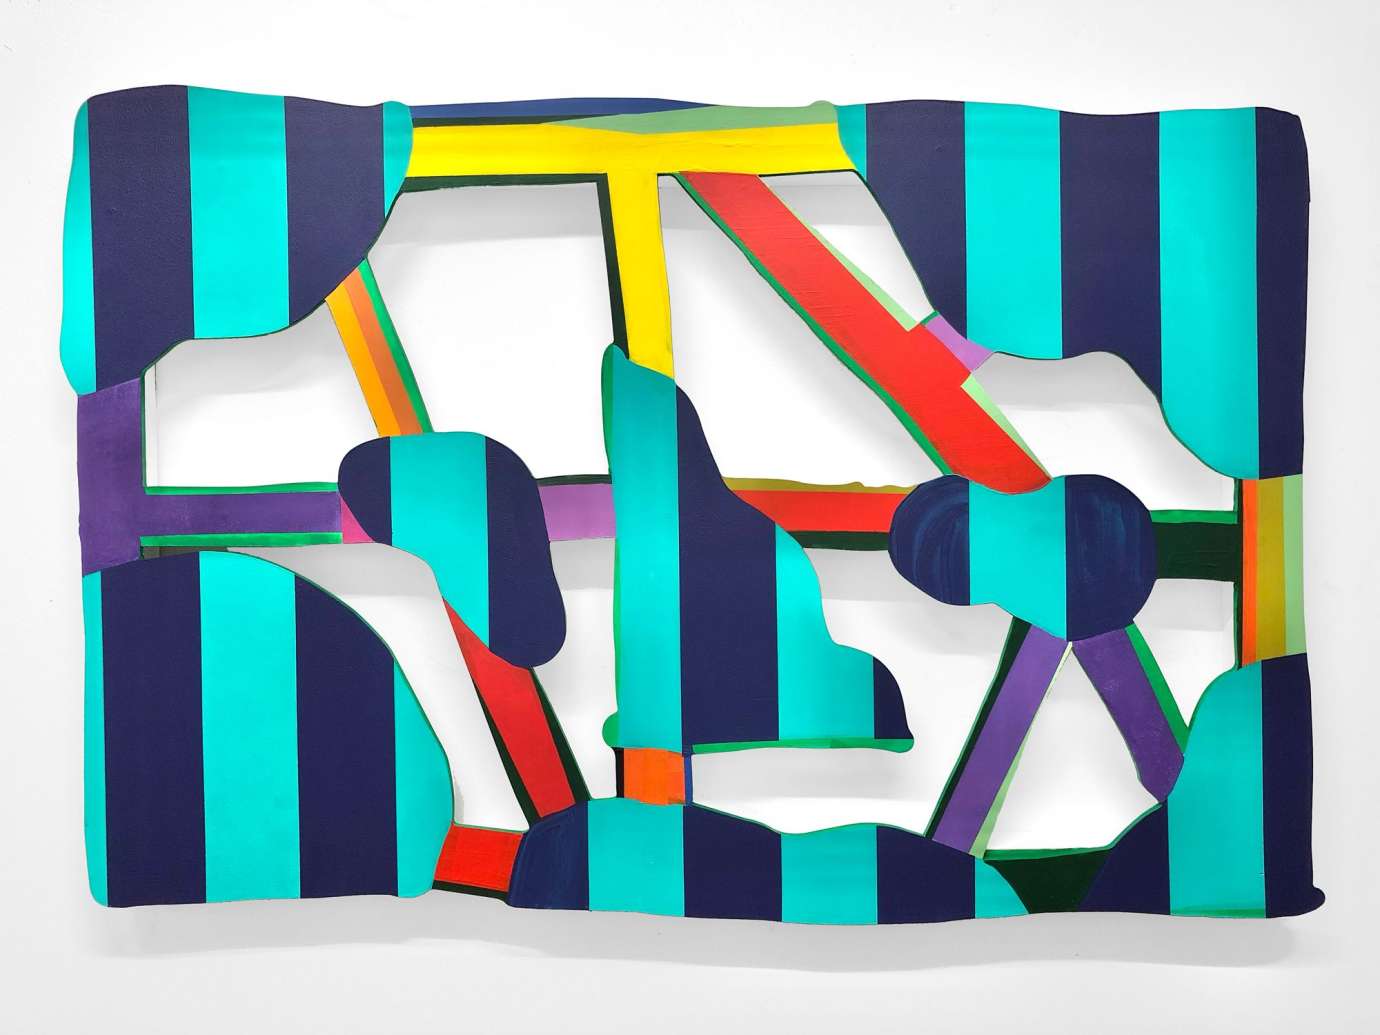 A sculptural piece by Jerstin Crosby using colorful organic and geometric shapes and lines